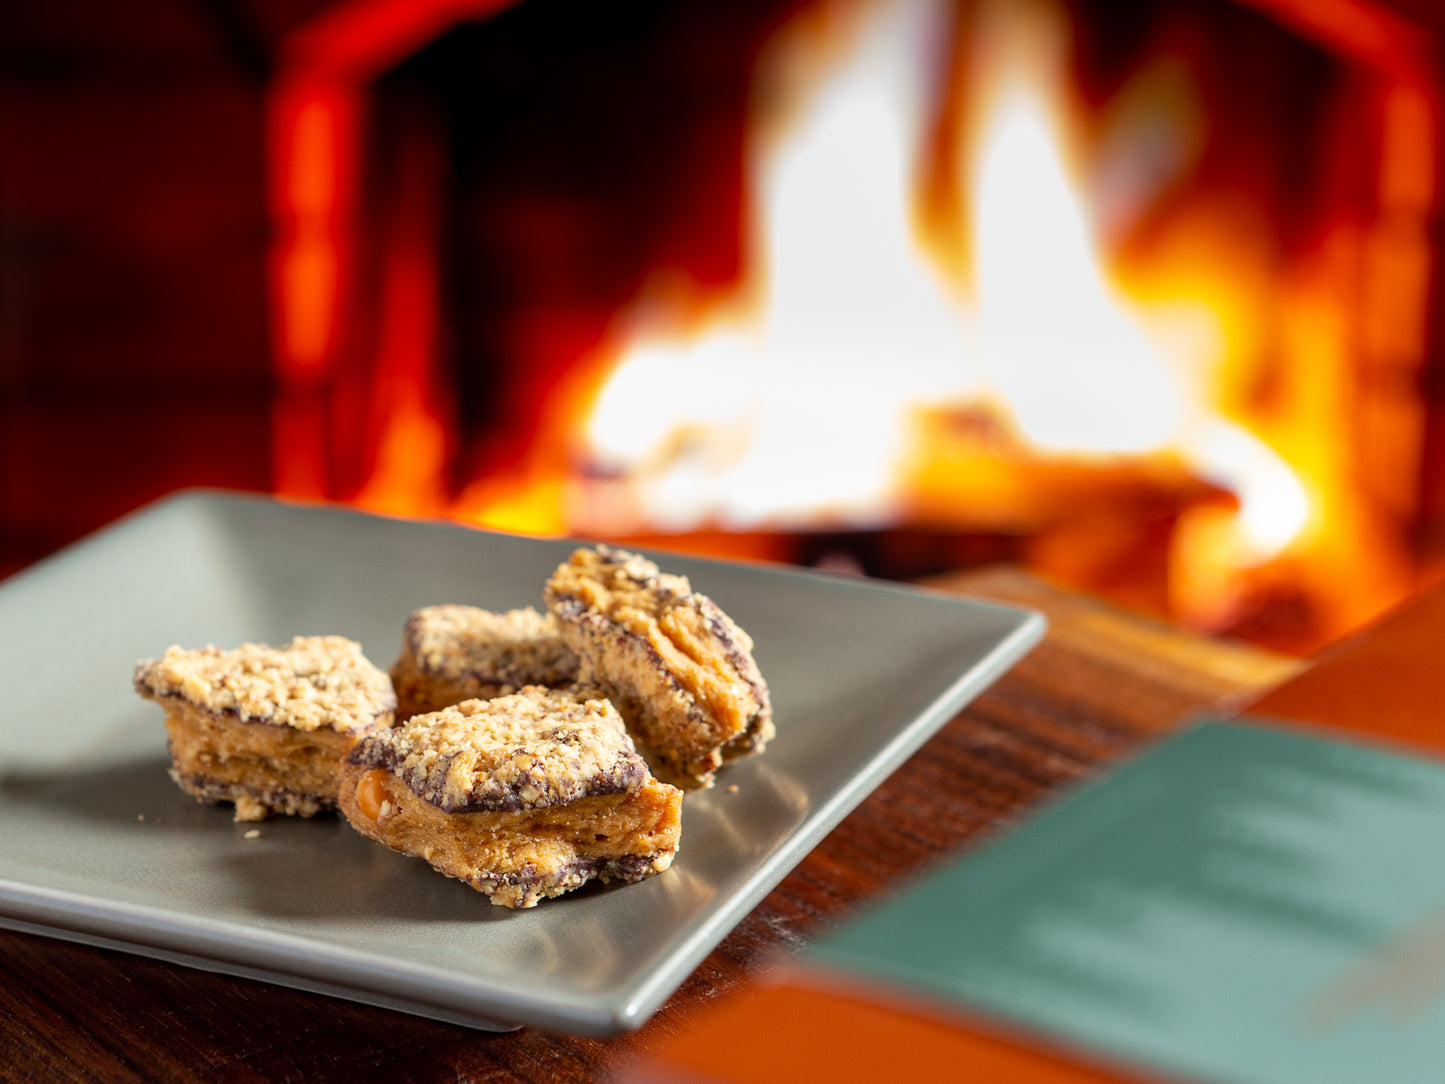 soft peanut butter brittle dipped in dark chocolate beside a cozy fireplace